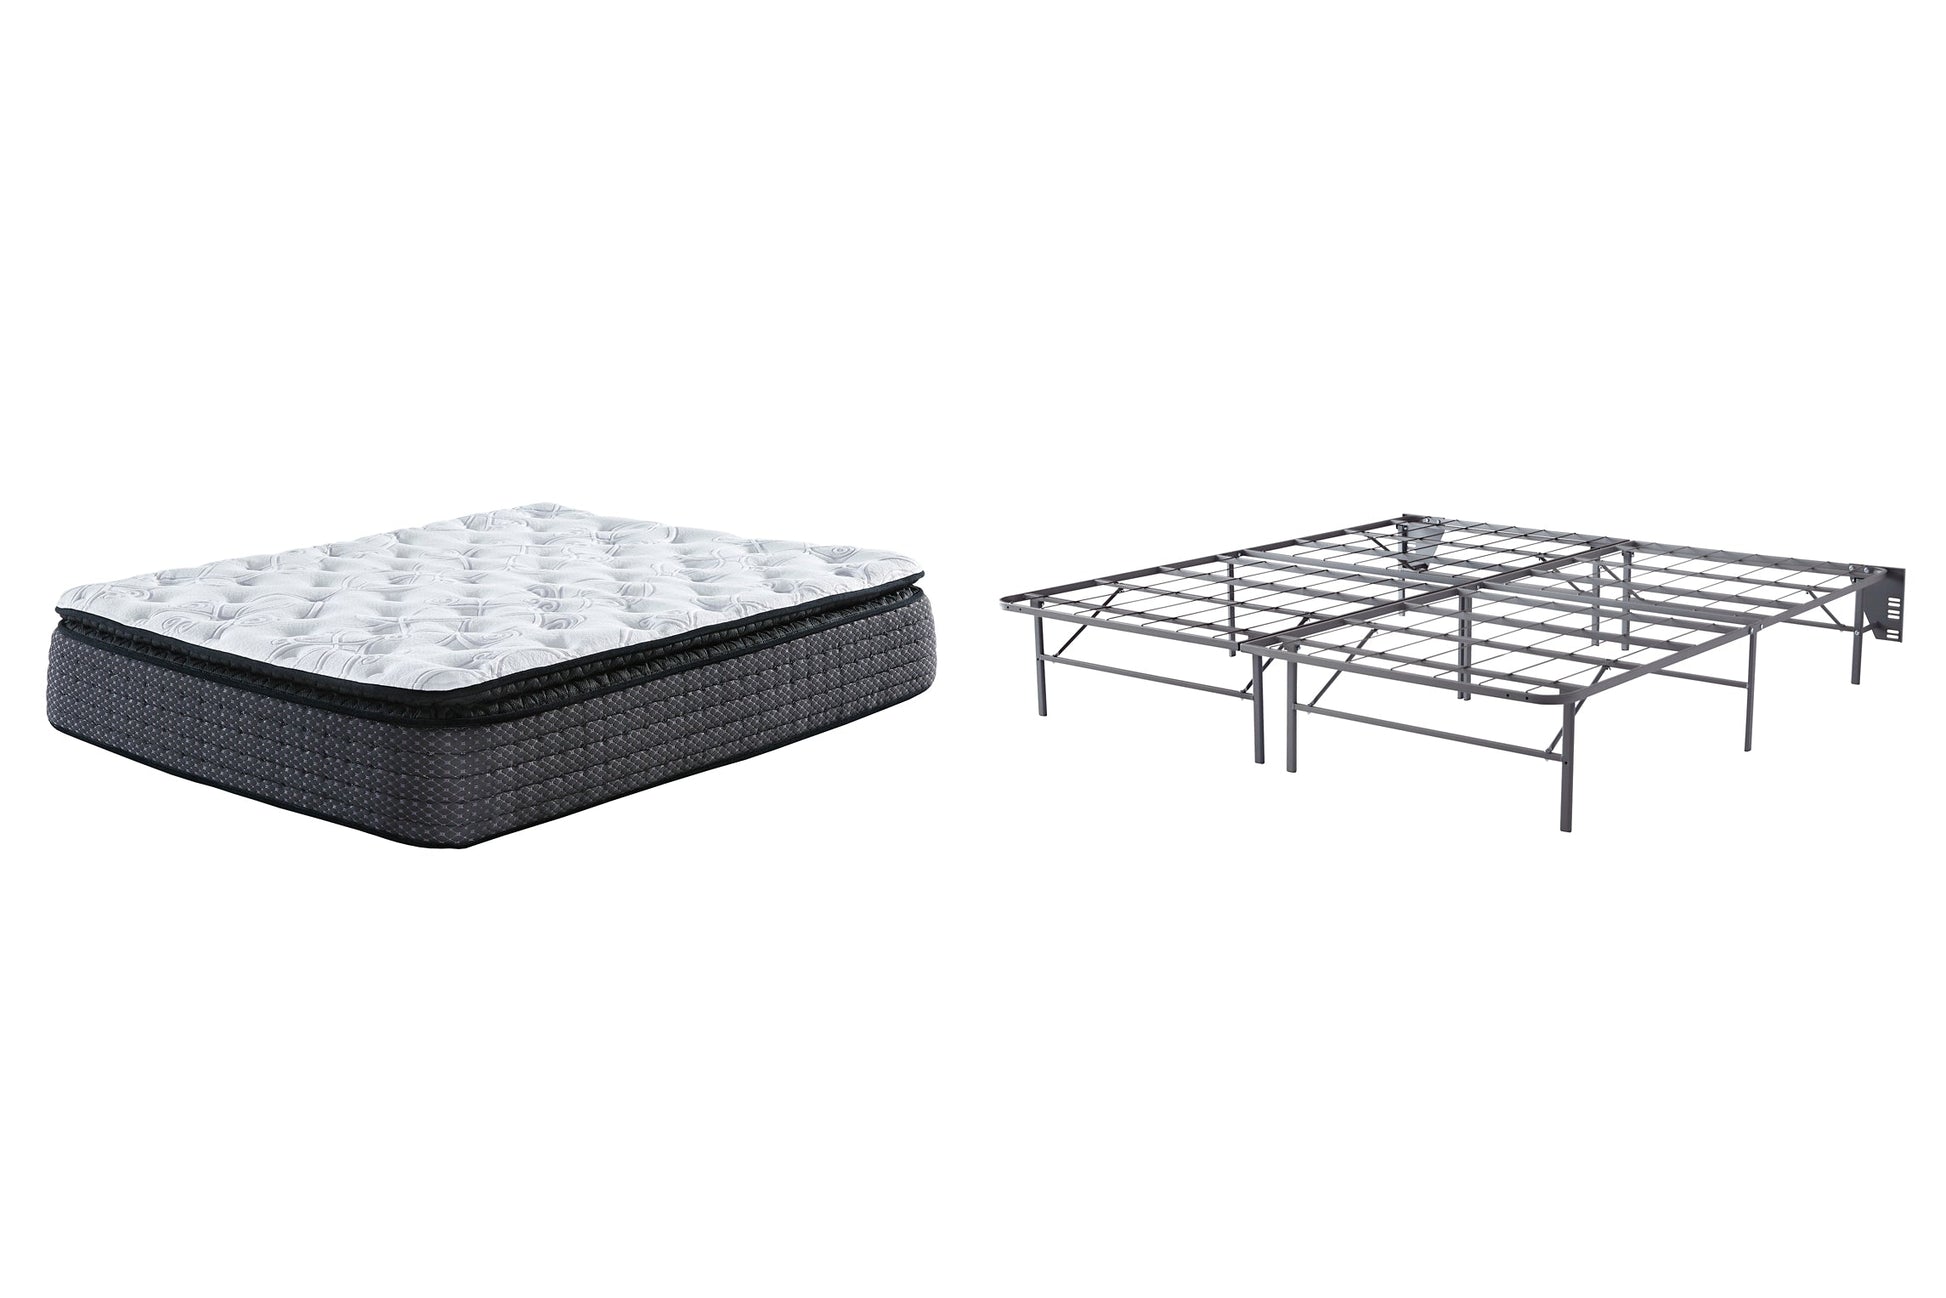 Limited Edition Pillowtop Mattress with Foundation at Cloud 9 Mattress & Furniture furniture, home furnishing, home decor